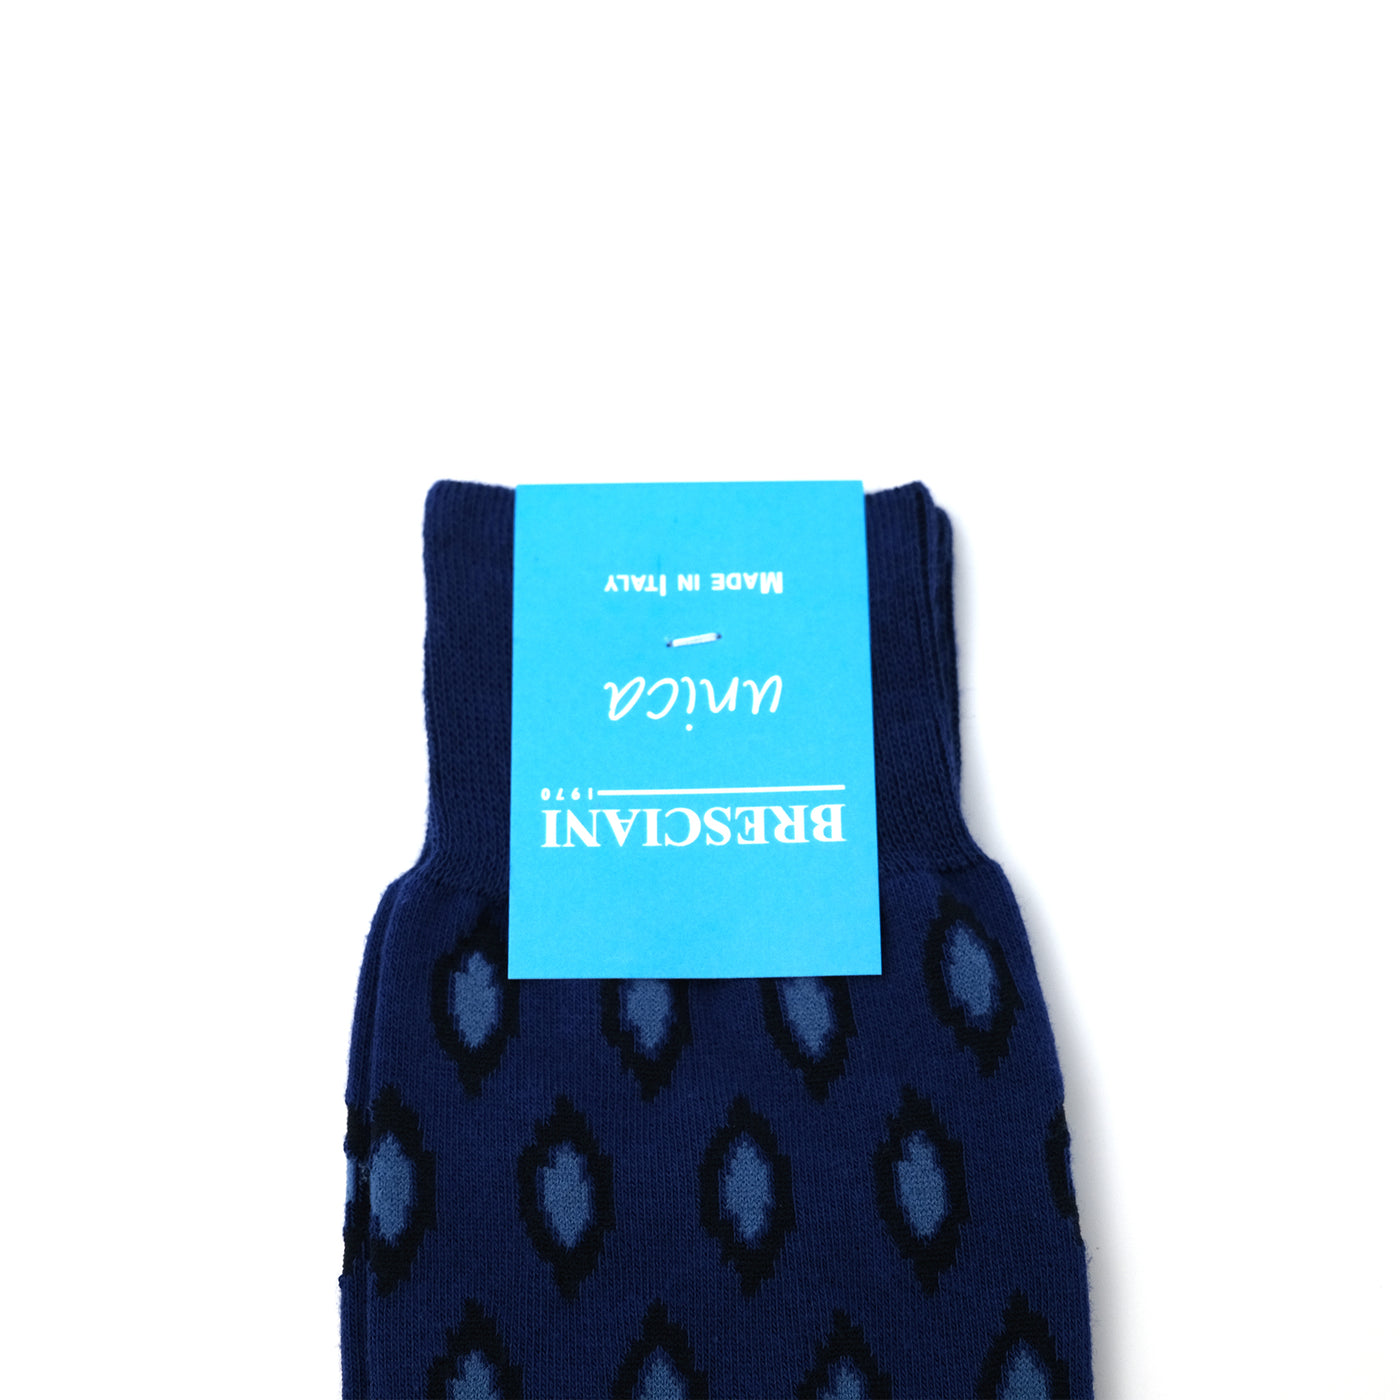 UNICA COLLECTION SOCKS CREST BLUE